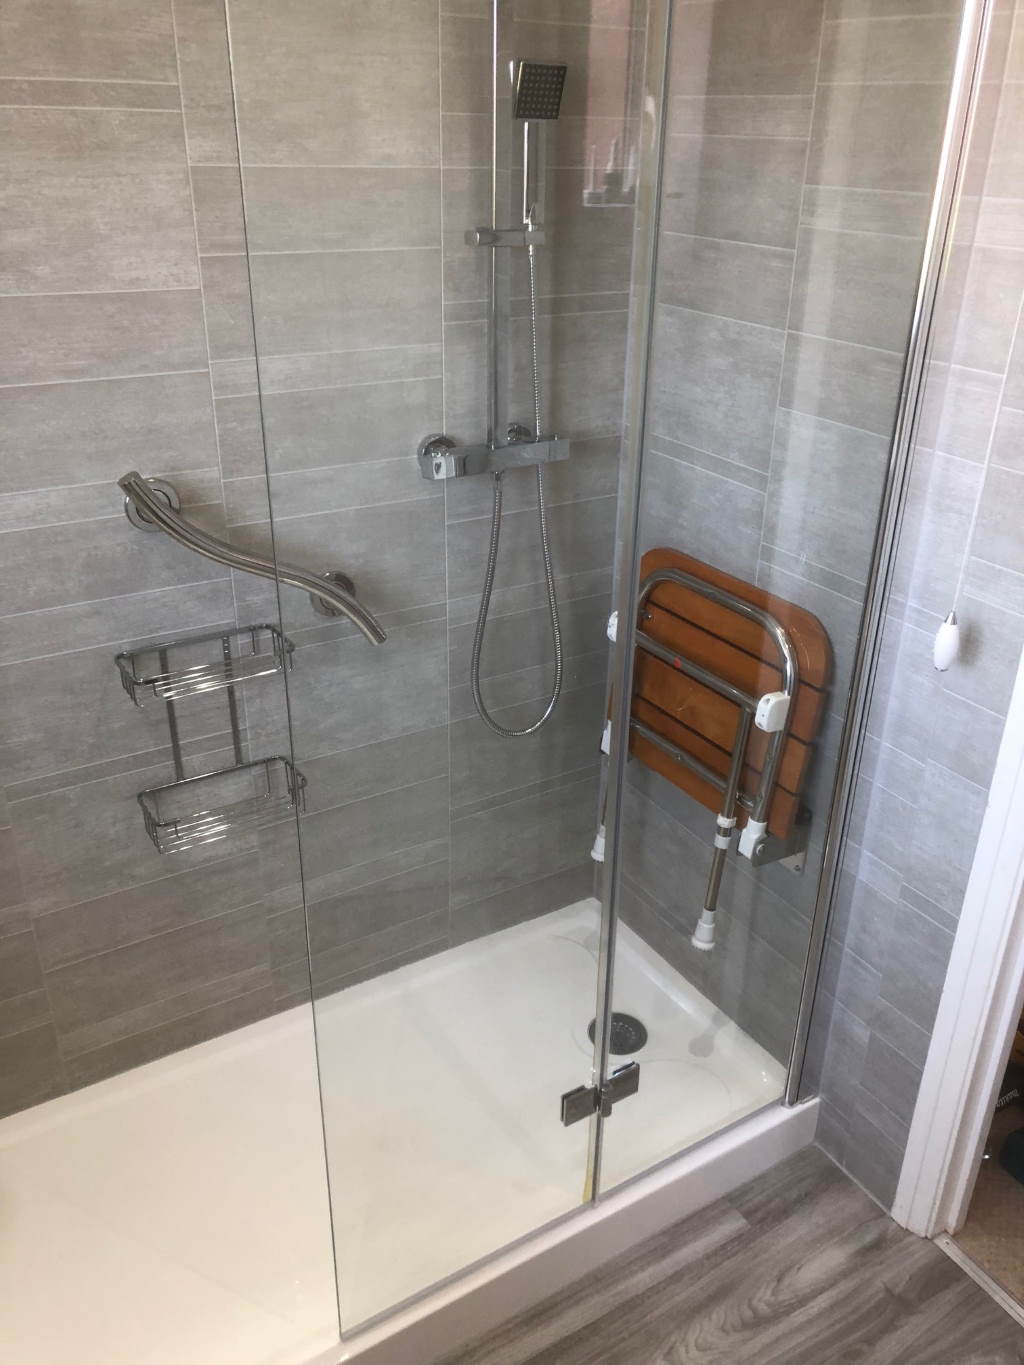 Replace Bath with Easy Access Mobility Walk in Shower Plumber installer in Birmingham B36 for Yvonne